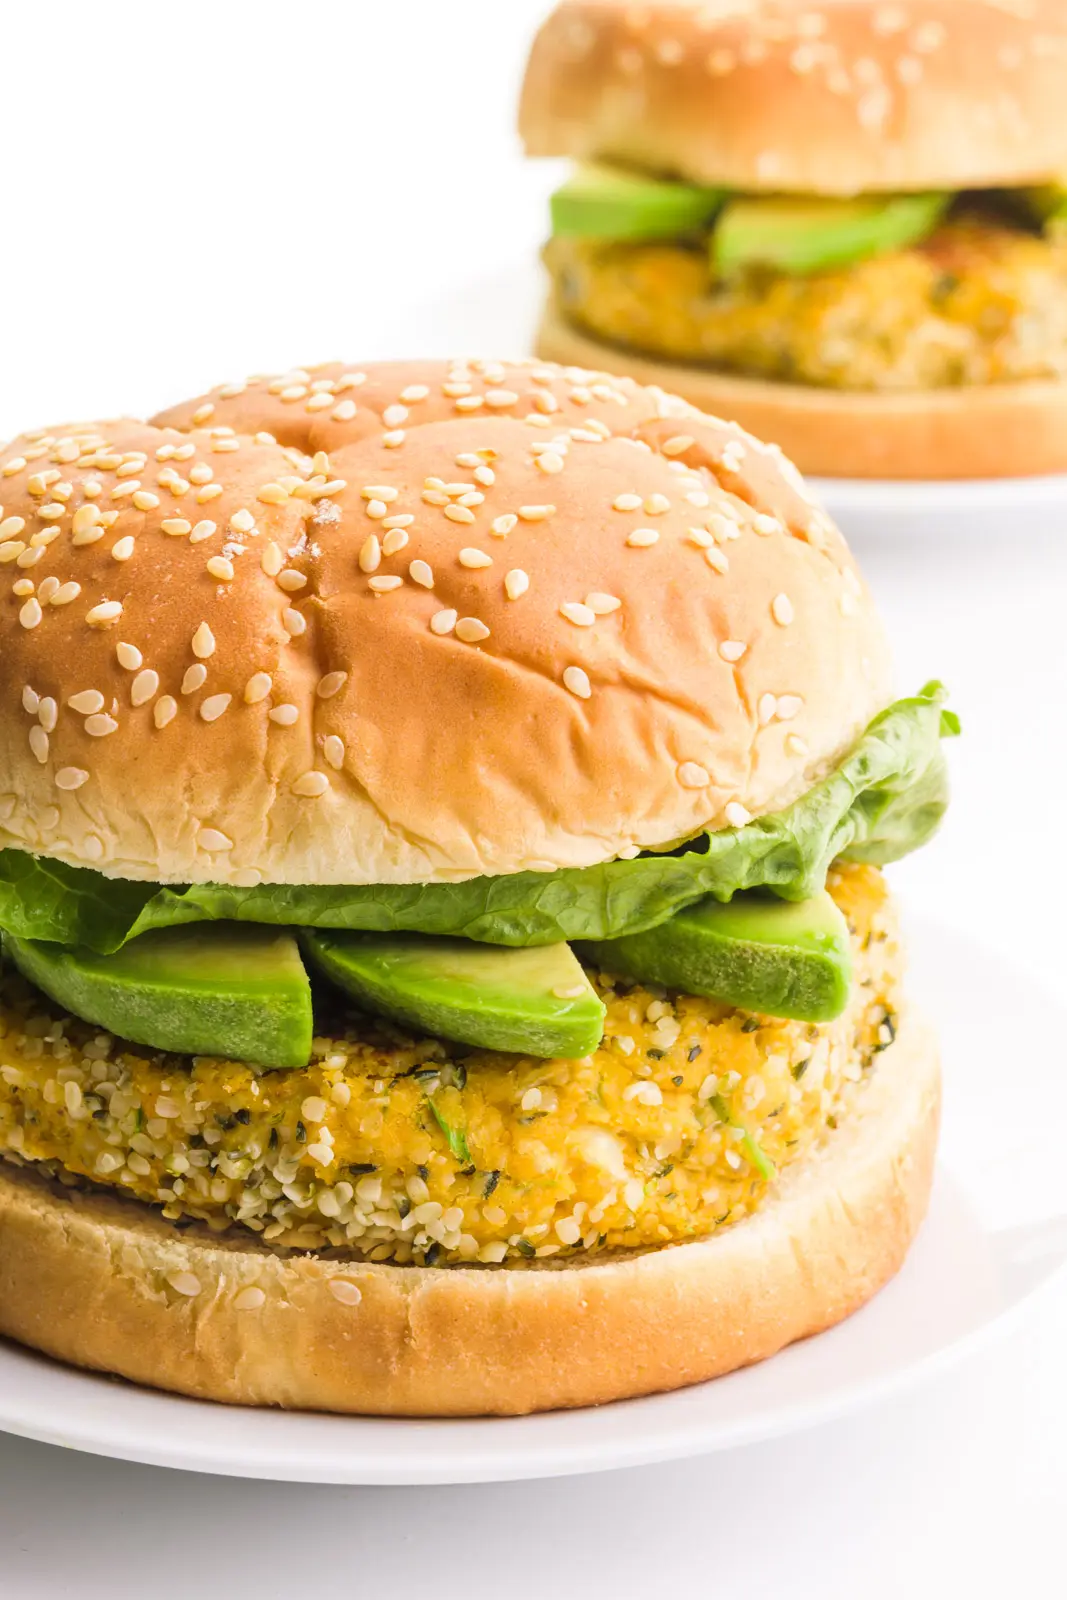 A hemp burger sits on a plate. It has avocado slices and lettuce on it. There's another one on a plate behind it.